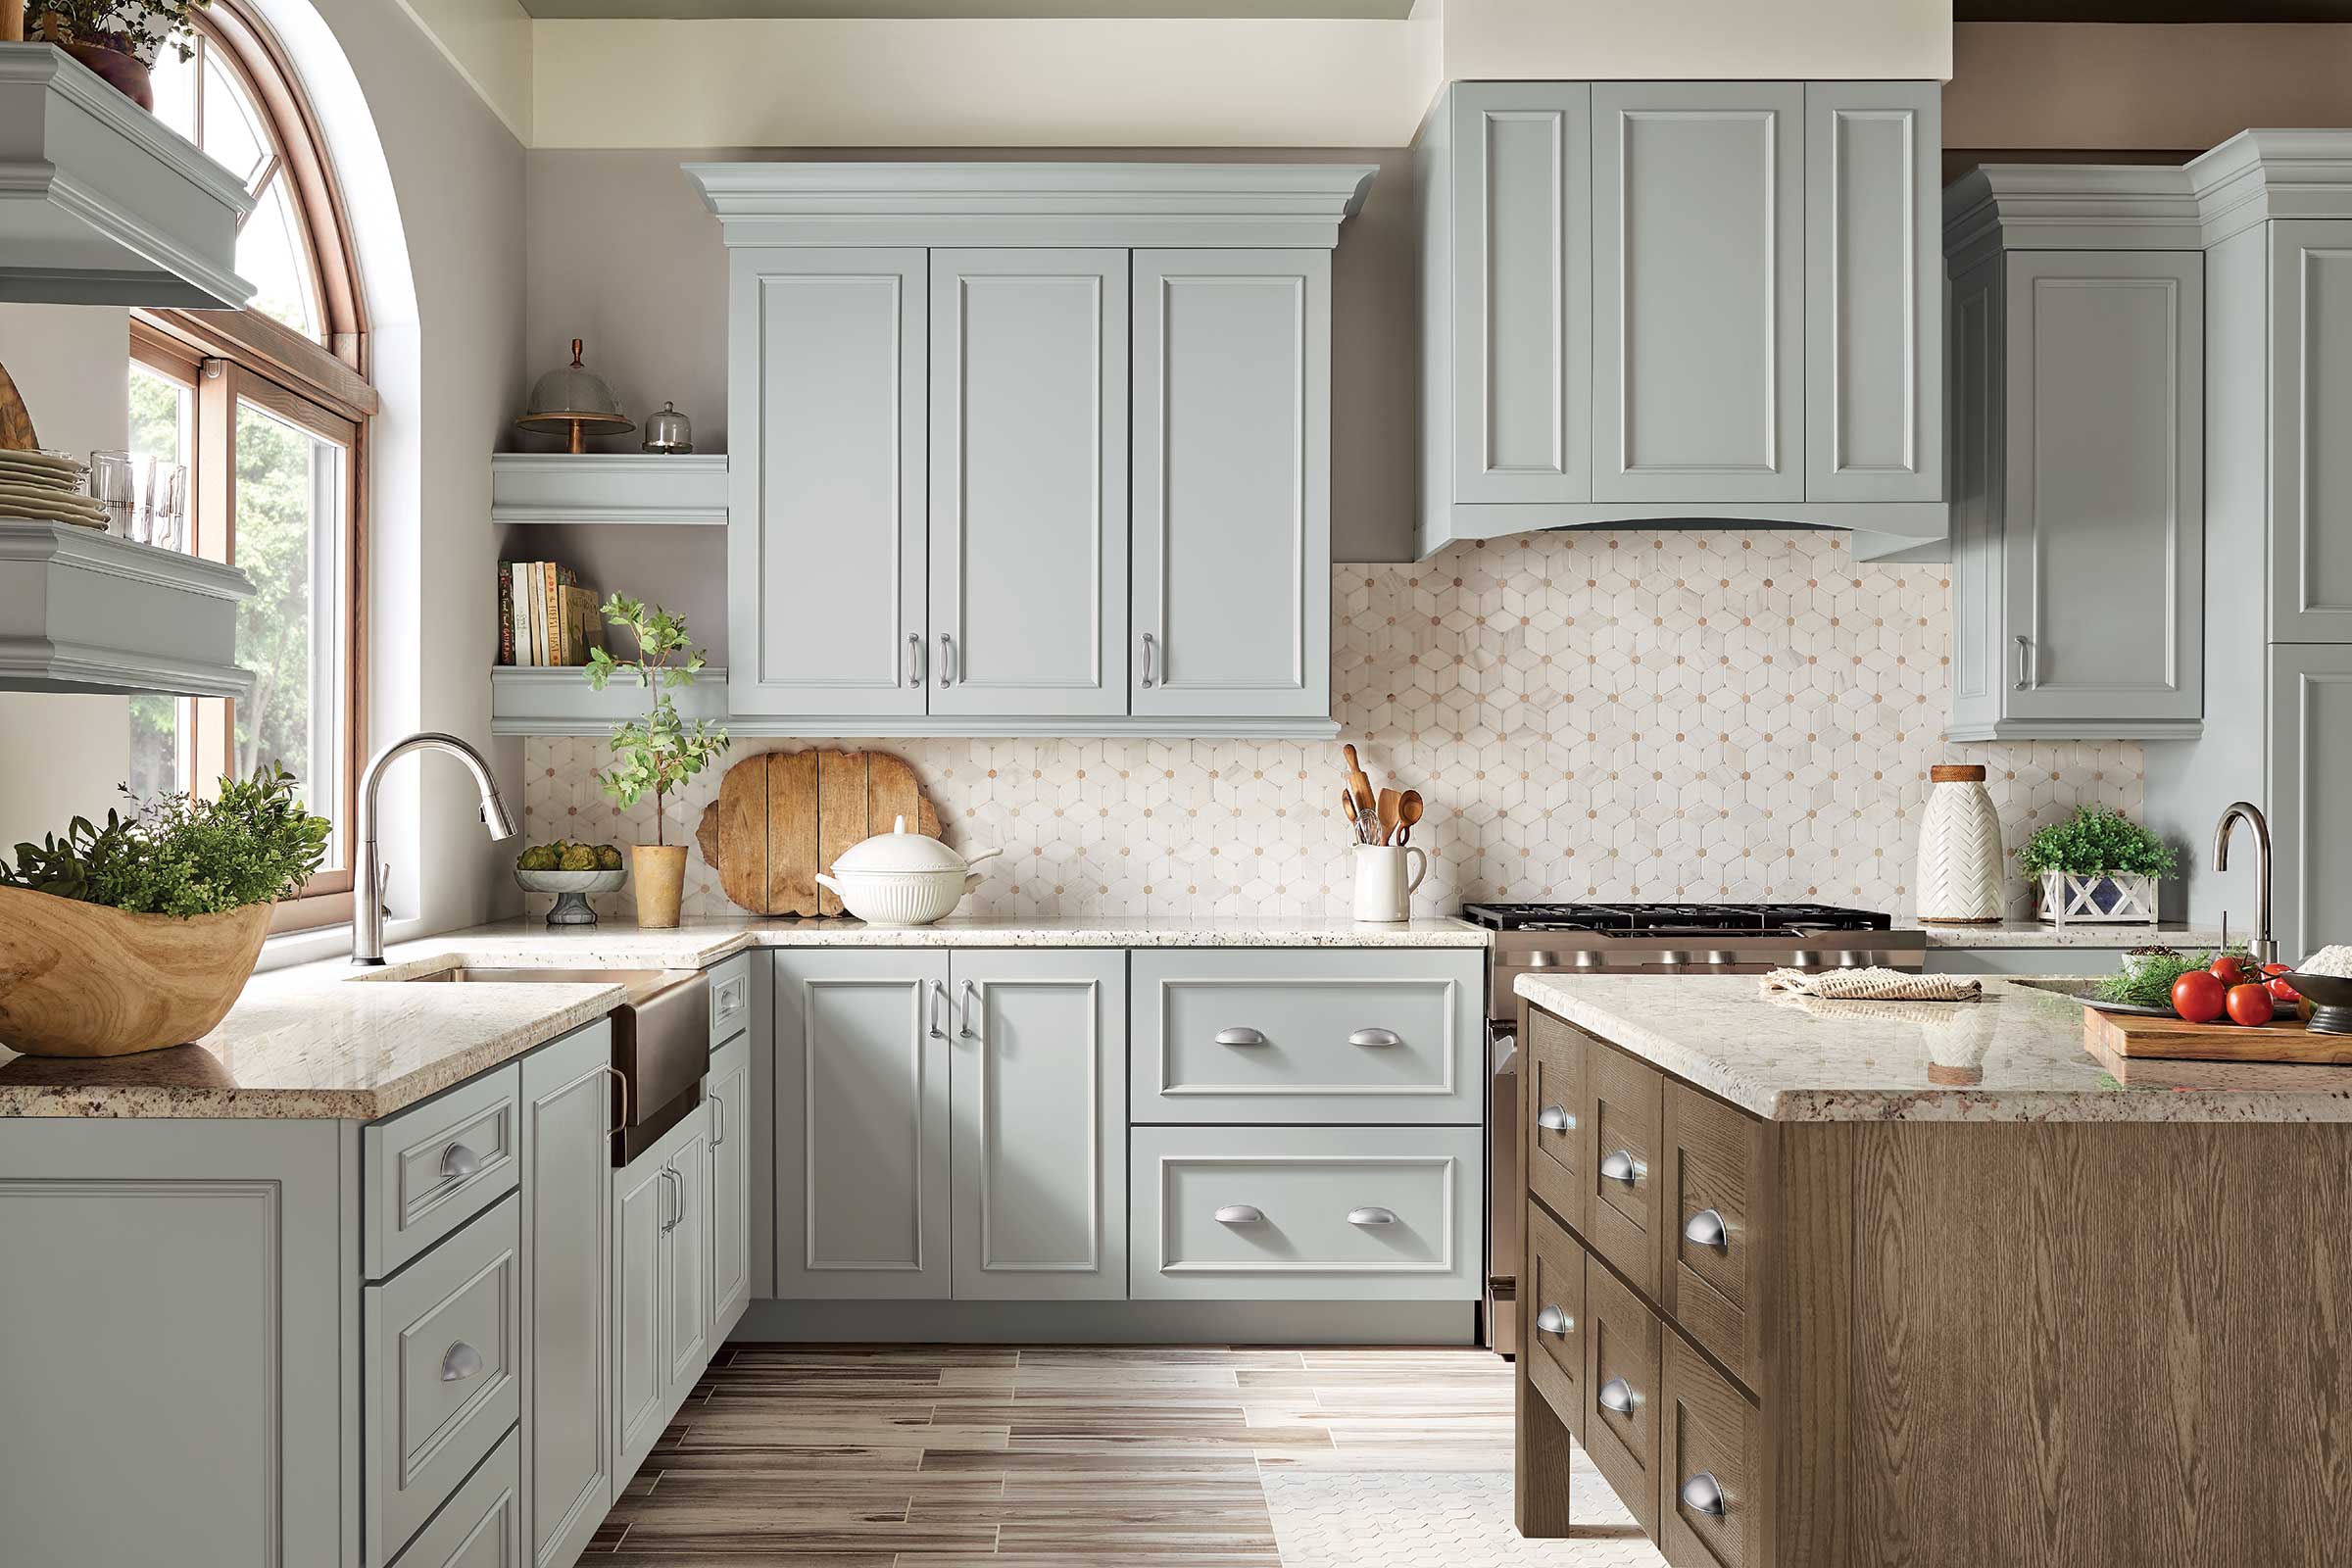 Kitchen Color Schemes, How To Pick Colors For Kitchen Cabinets